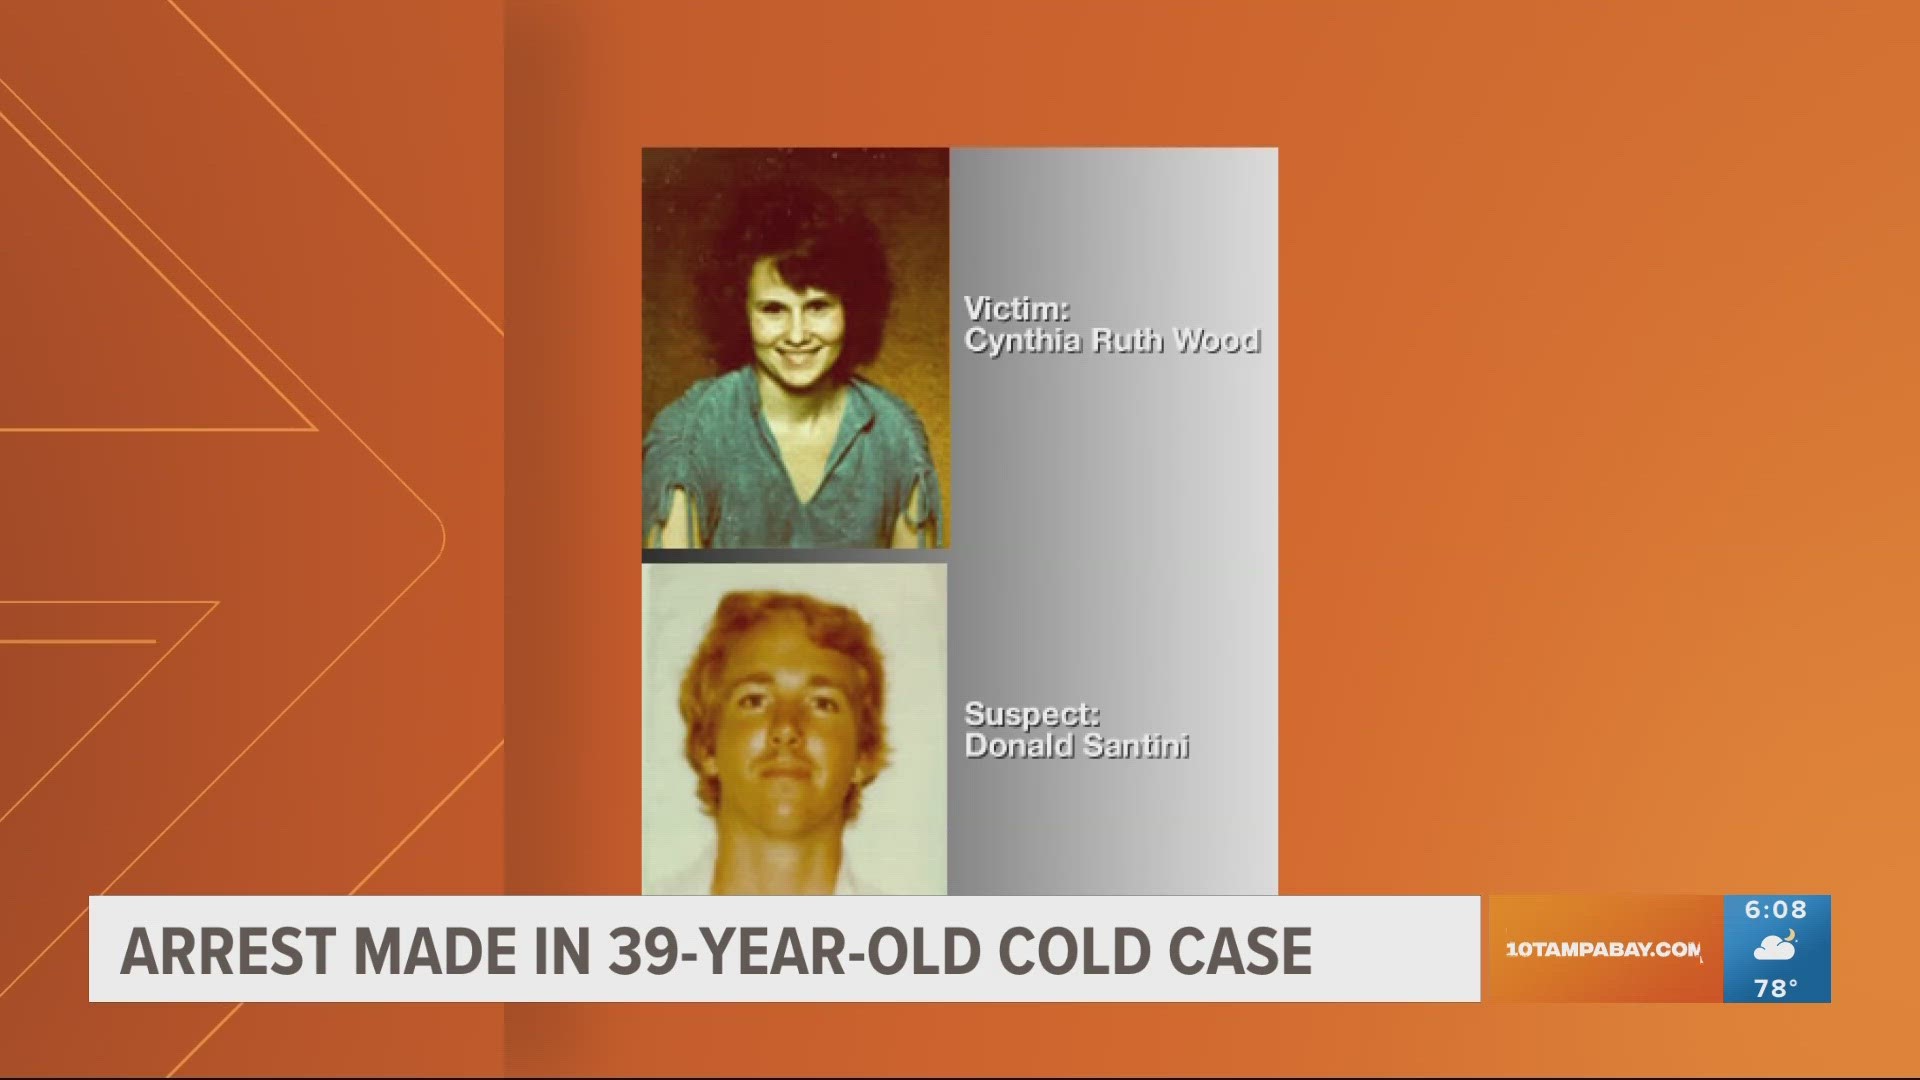 Donald Santini is accused of strangling Cynthia Ruth Wood and dumping her body in a ditch.